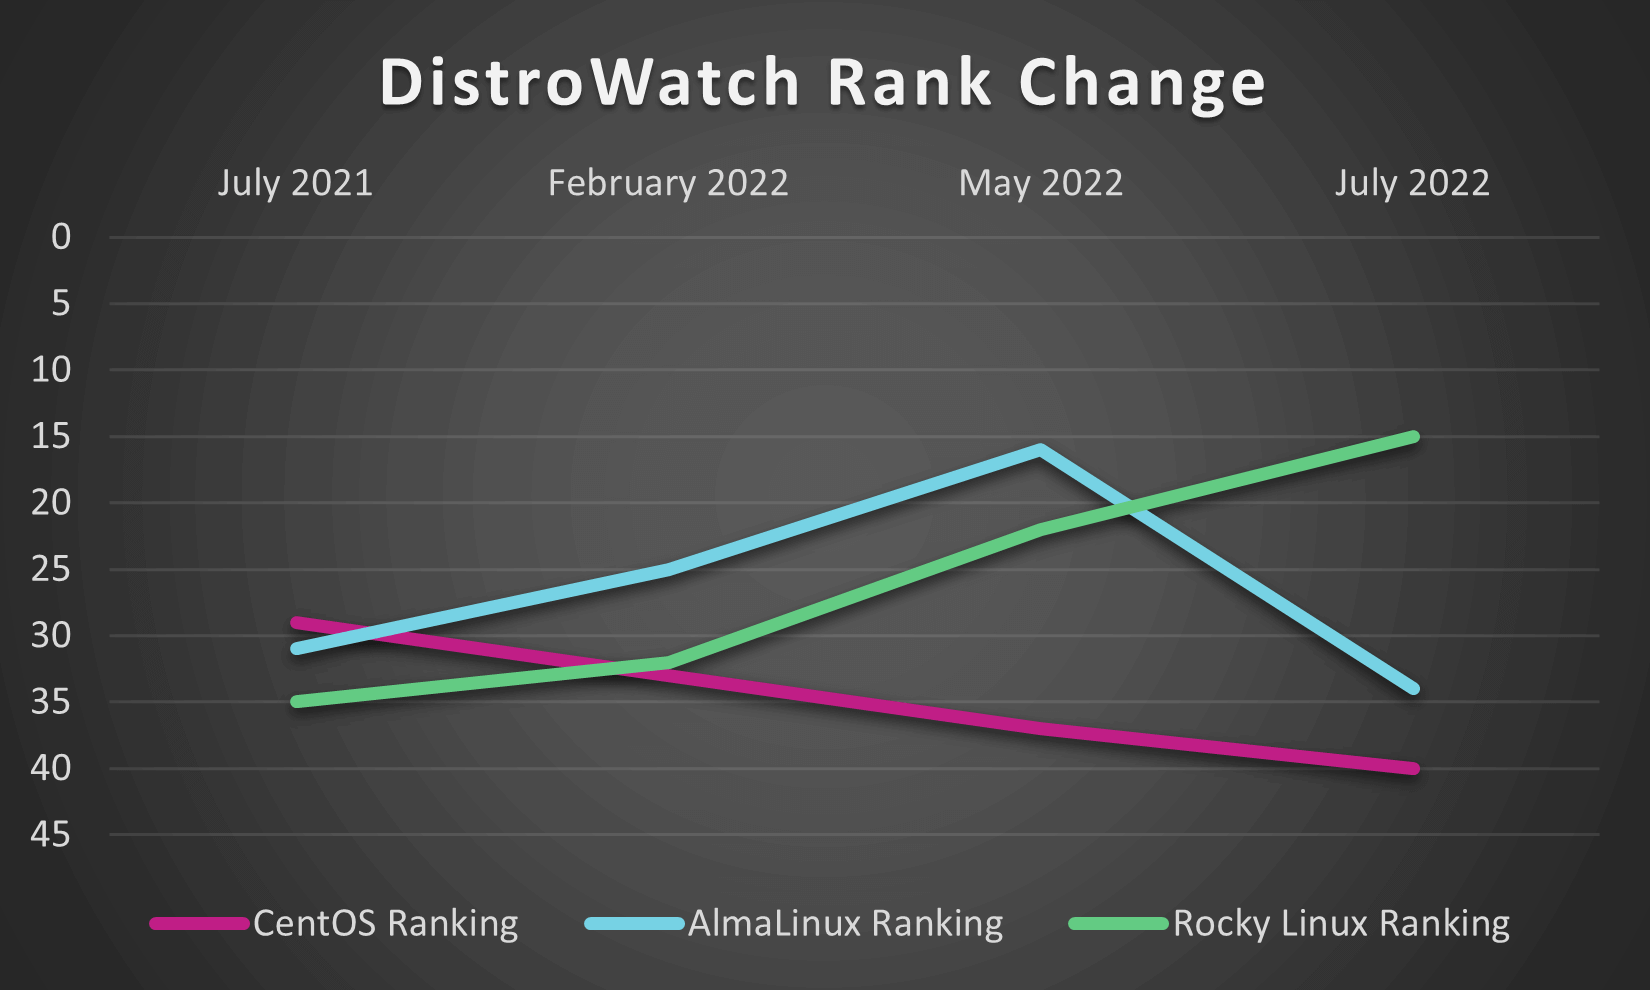 graph showing centos almalinux and rocky linux distrowatch ranking change over 12 month